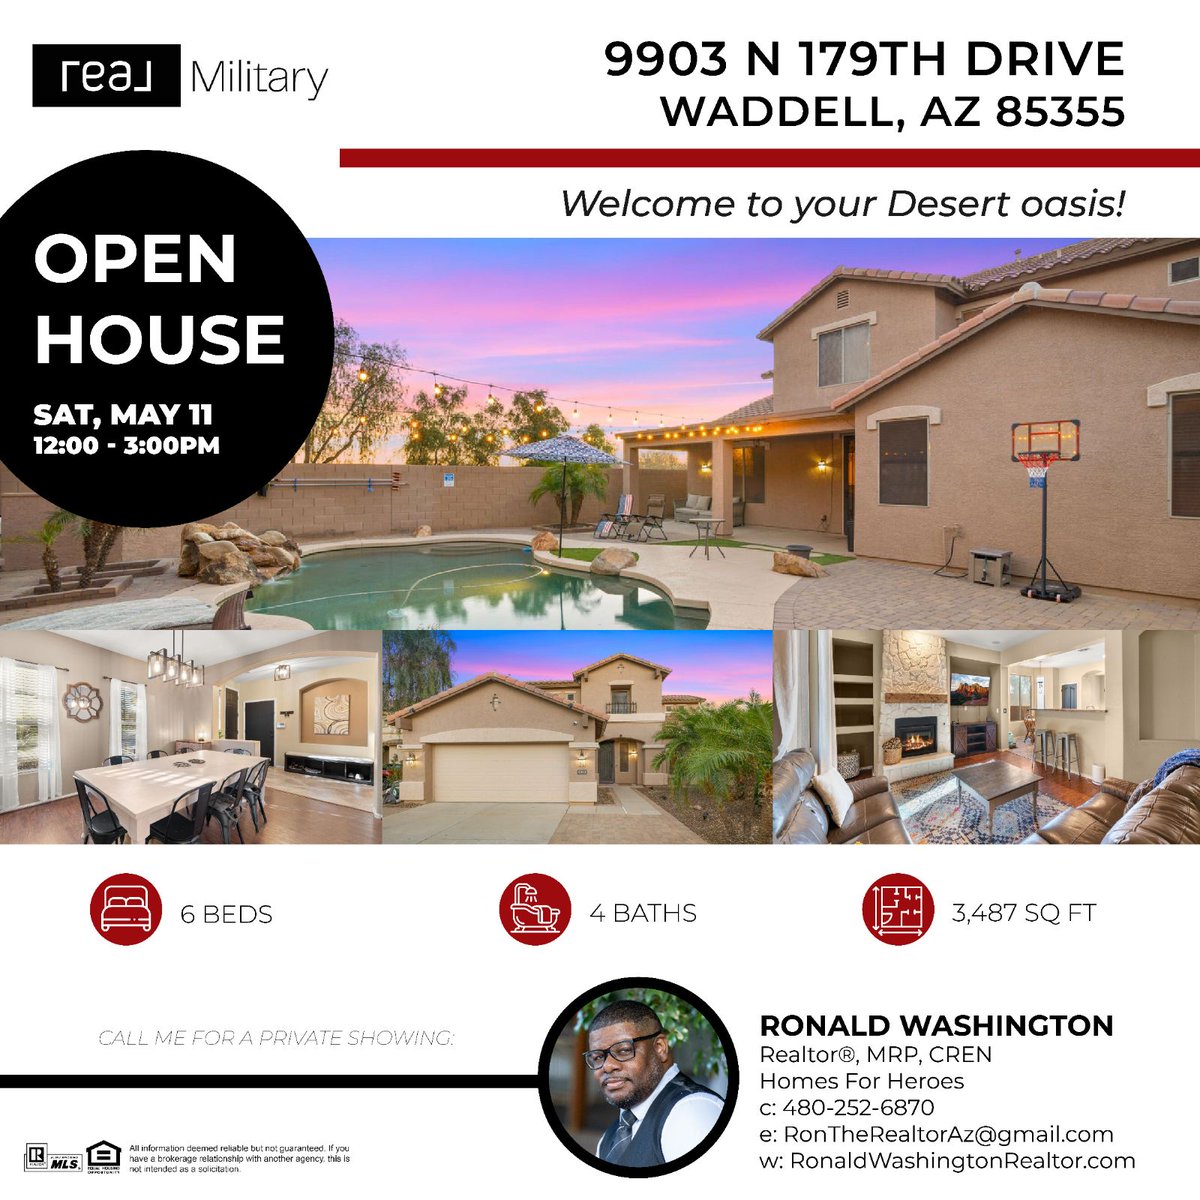 Beautiful West Valley family home with all the bells and whistles! 
#arizonarealtor #arizonarealestate
#homesforheroes #rontherealtor